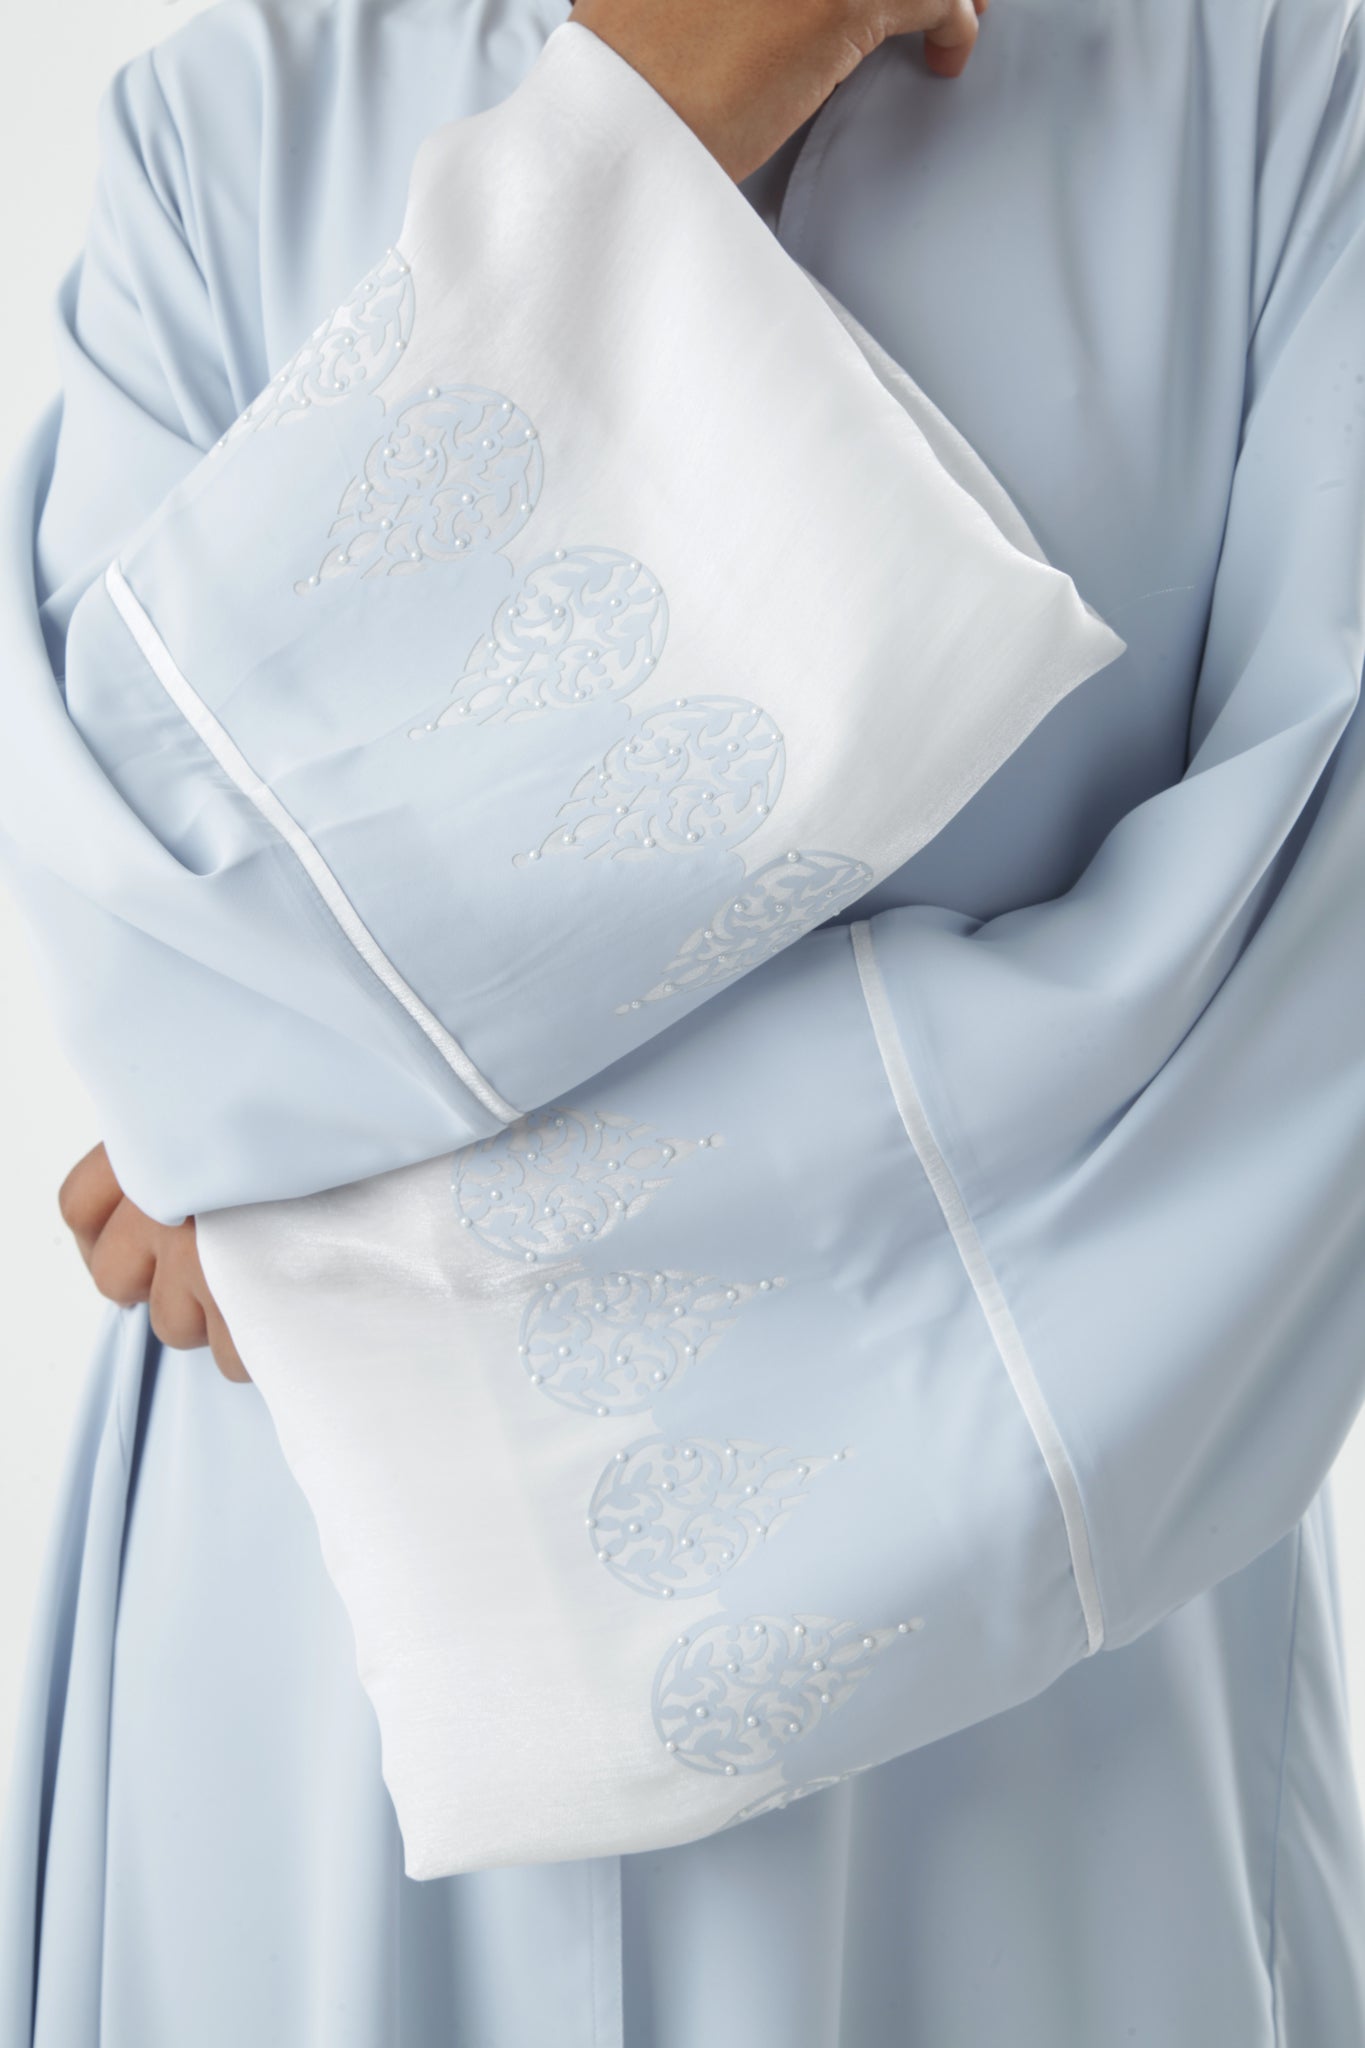 Sky Blue Color Abaya With Sleeves Design